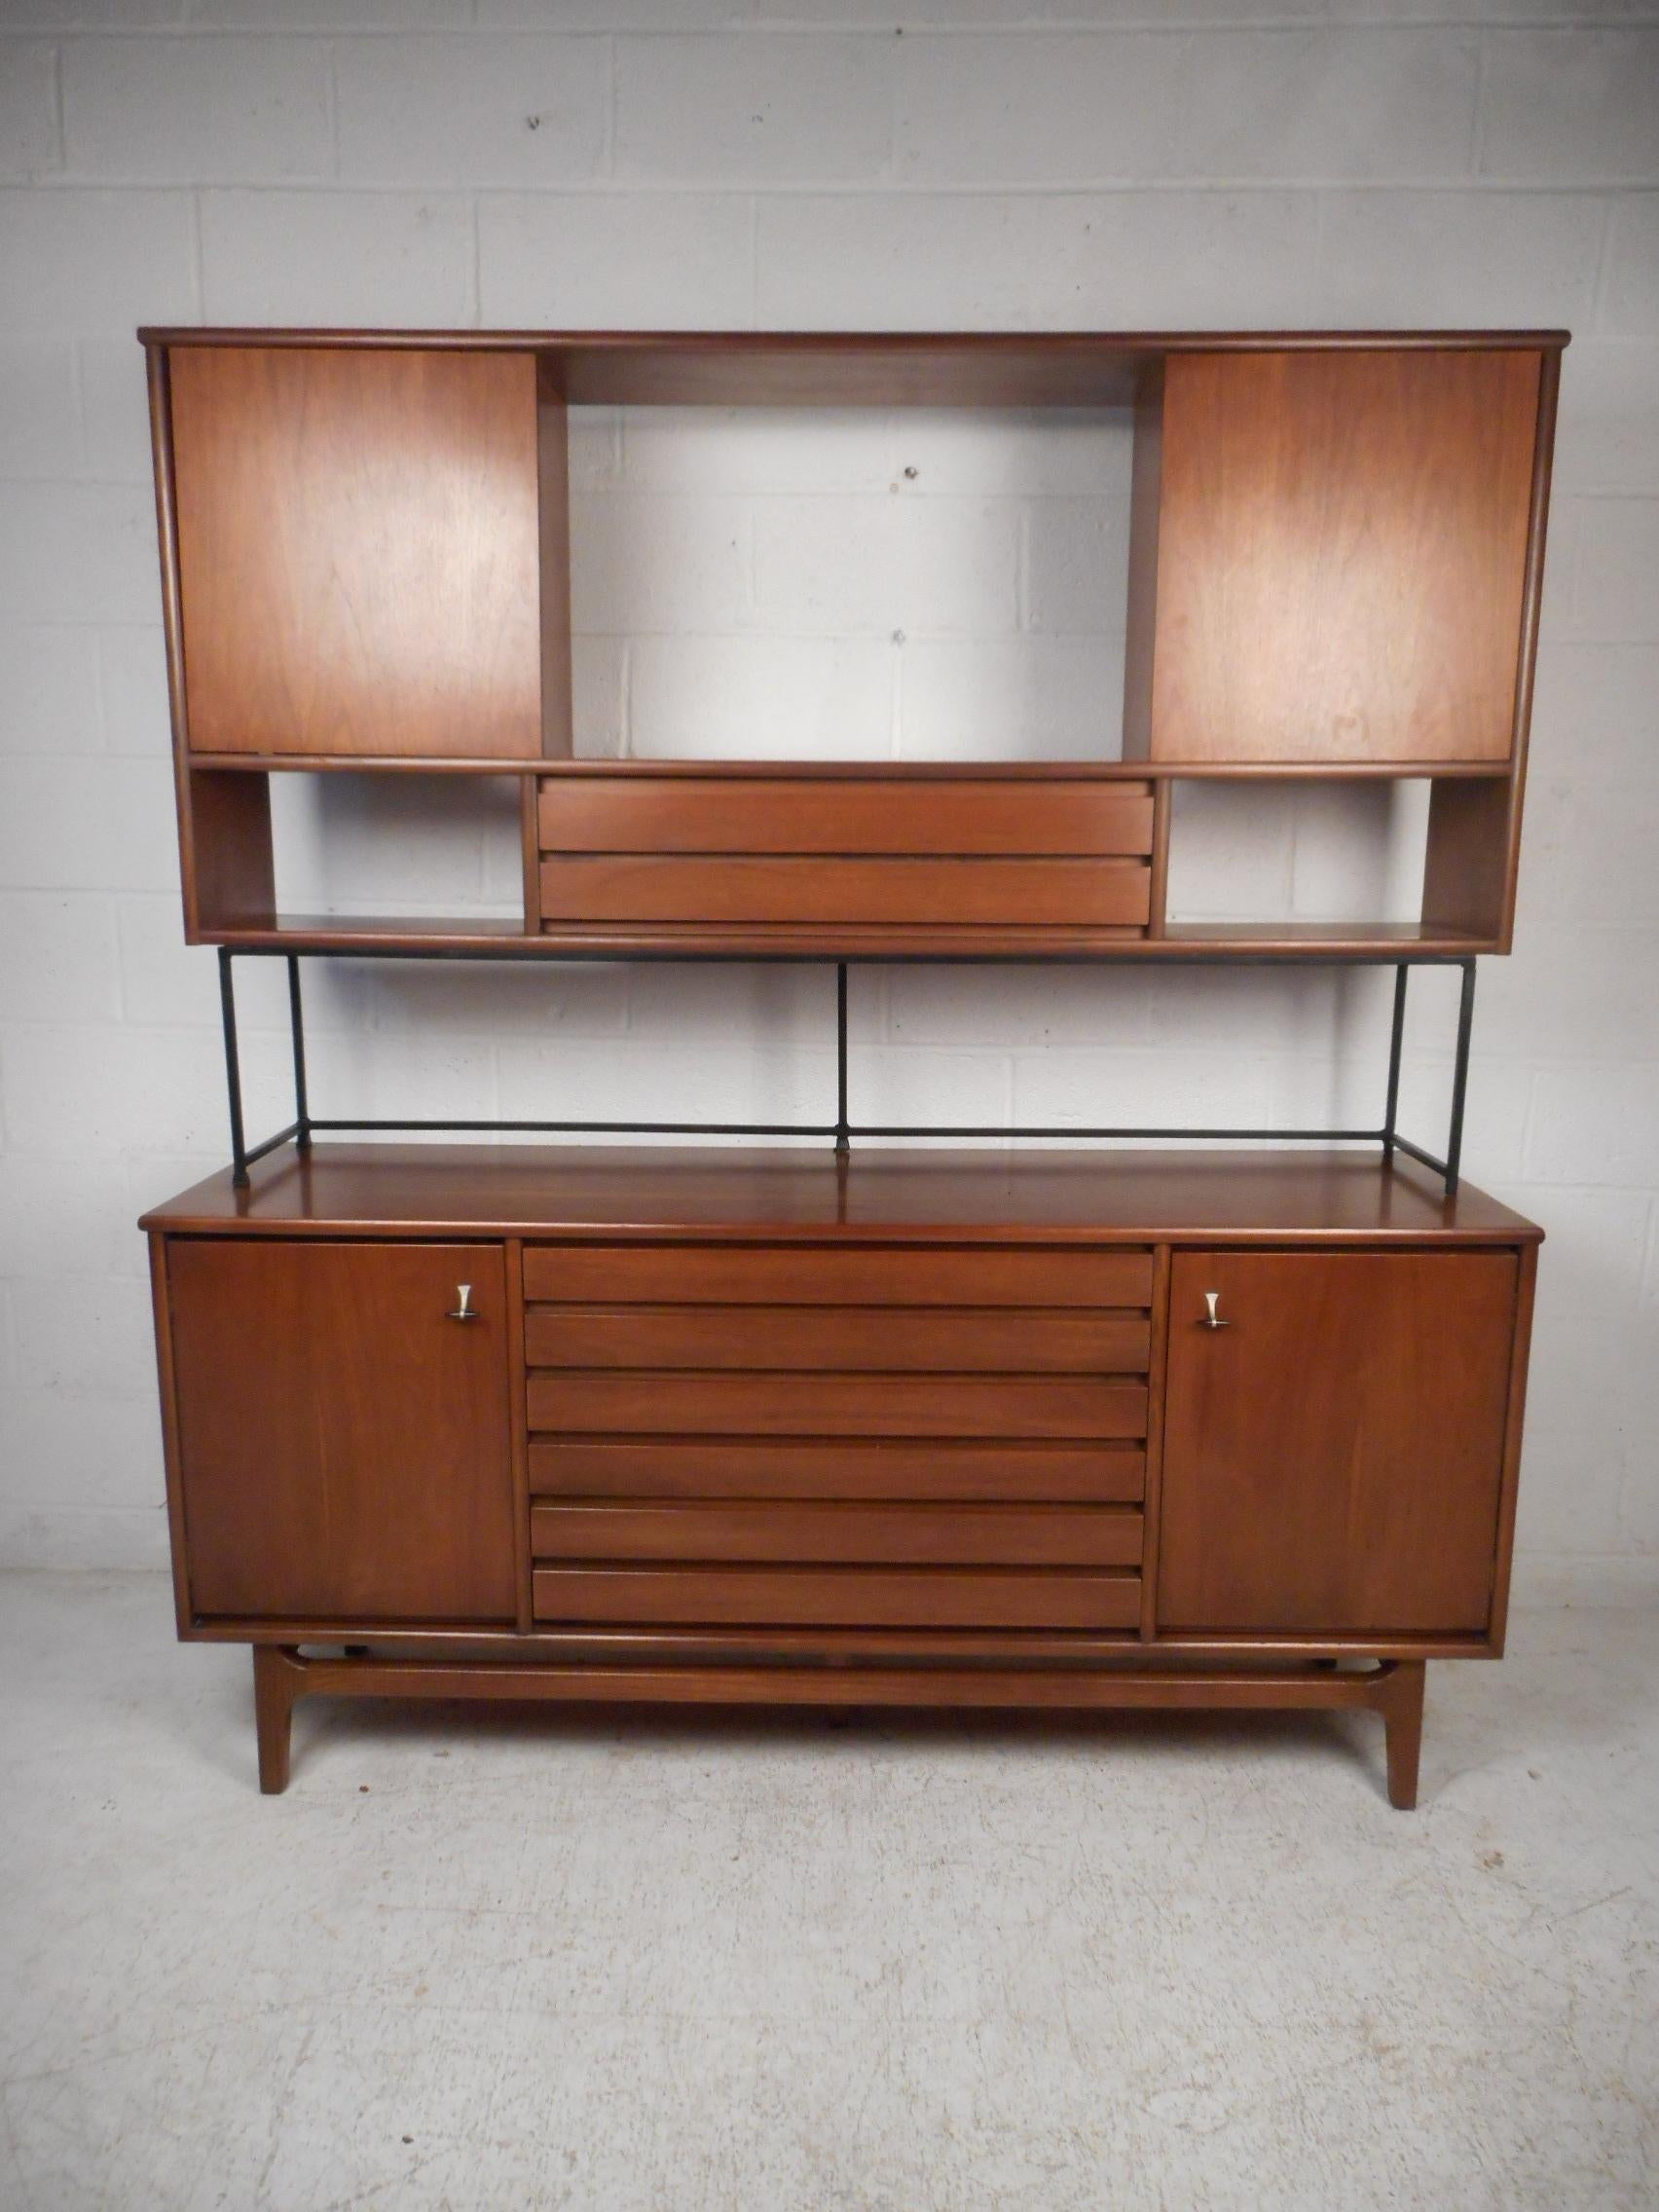 This impressive midcentury piece features a sturady finished walnut construction including a finished back, a credenza with three dovetail jointed drawers with two cabinets on either side provide ample storage space, and a topper piece with sliding